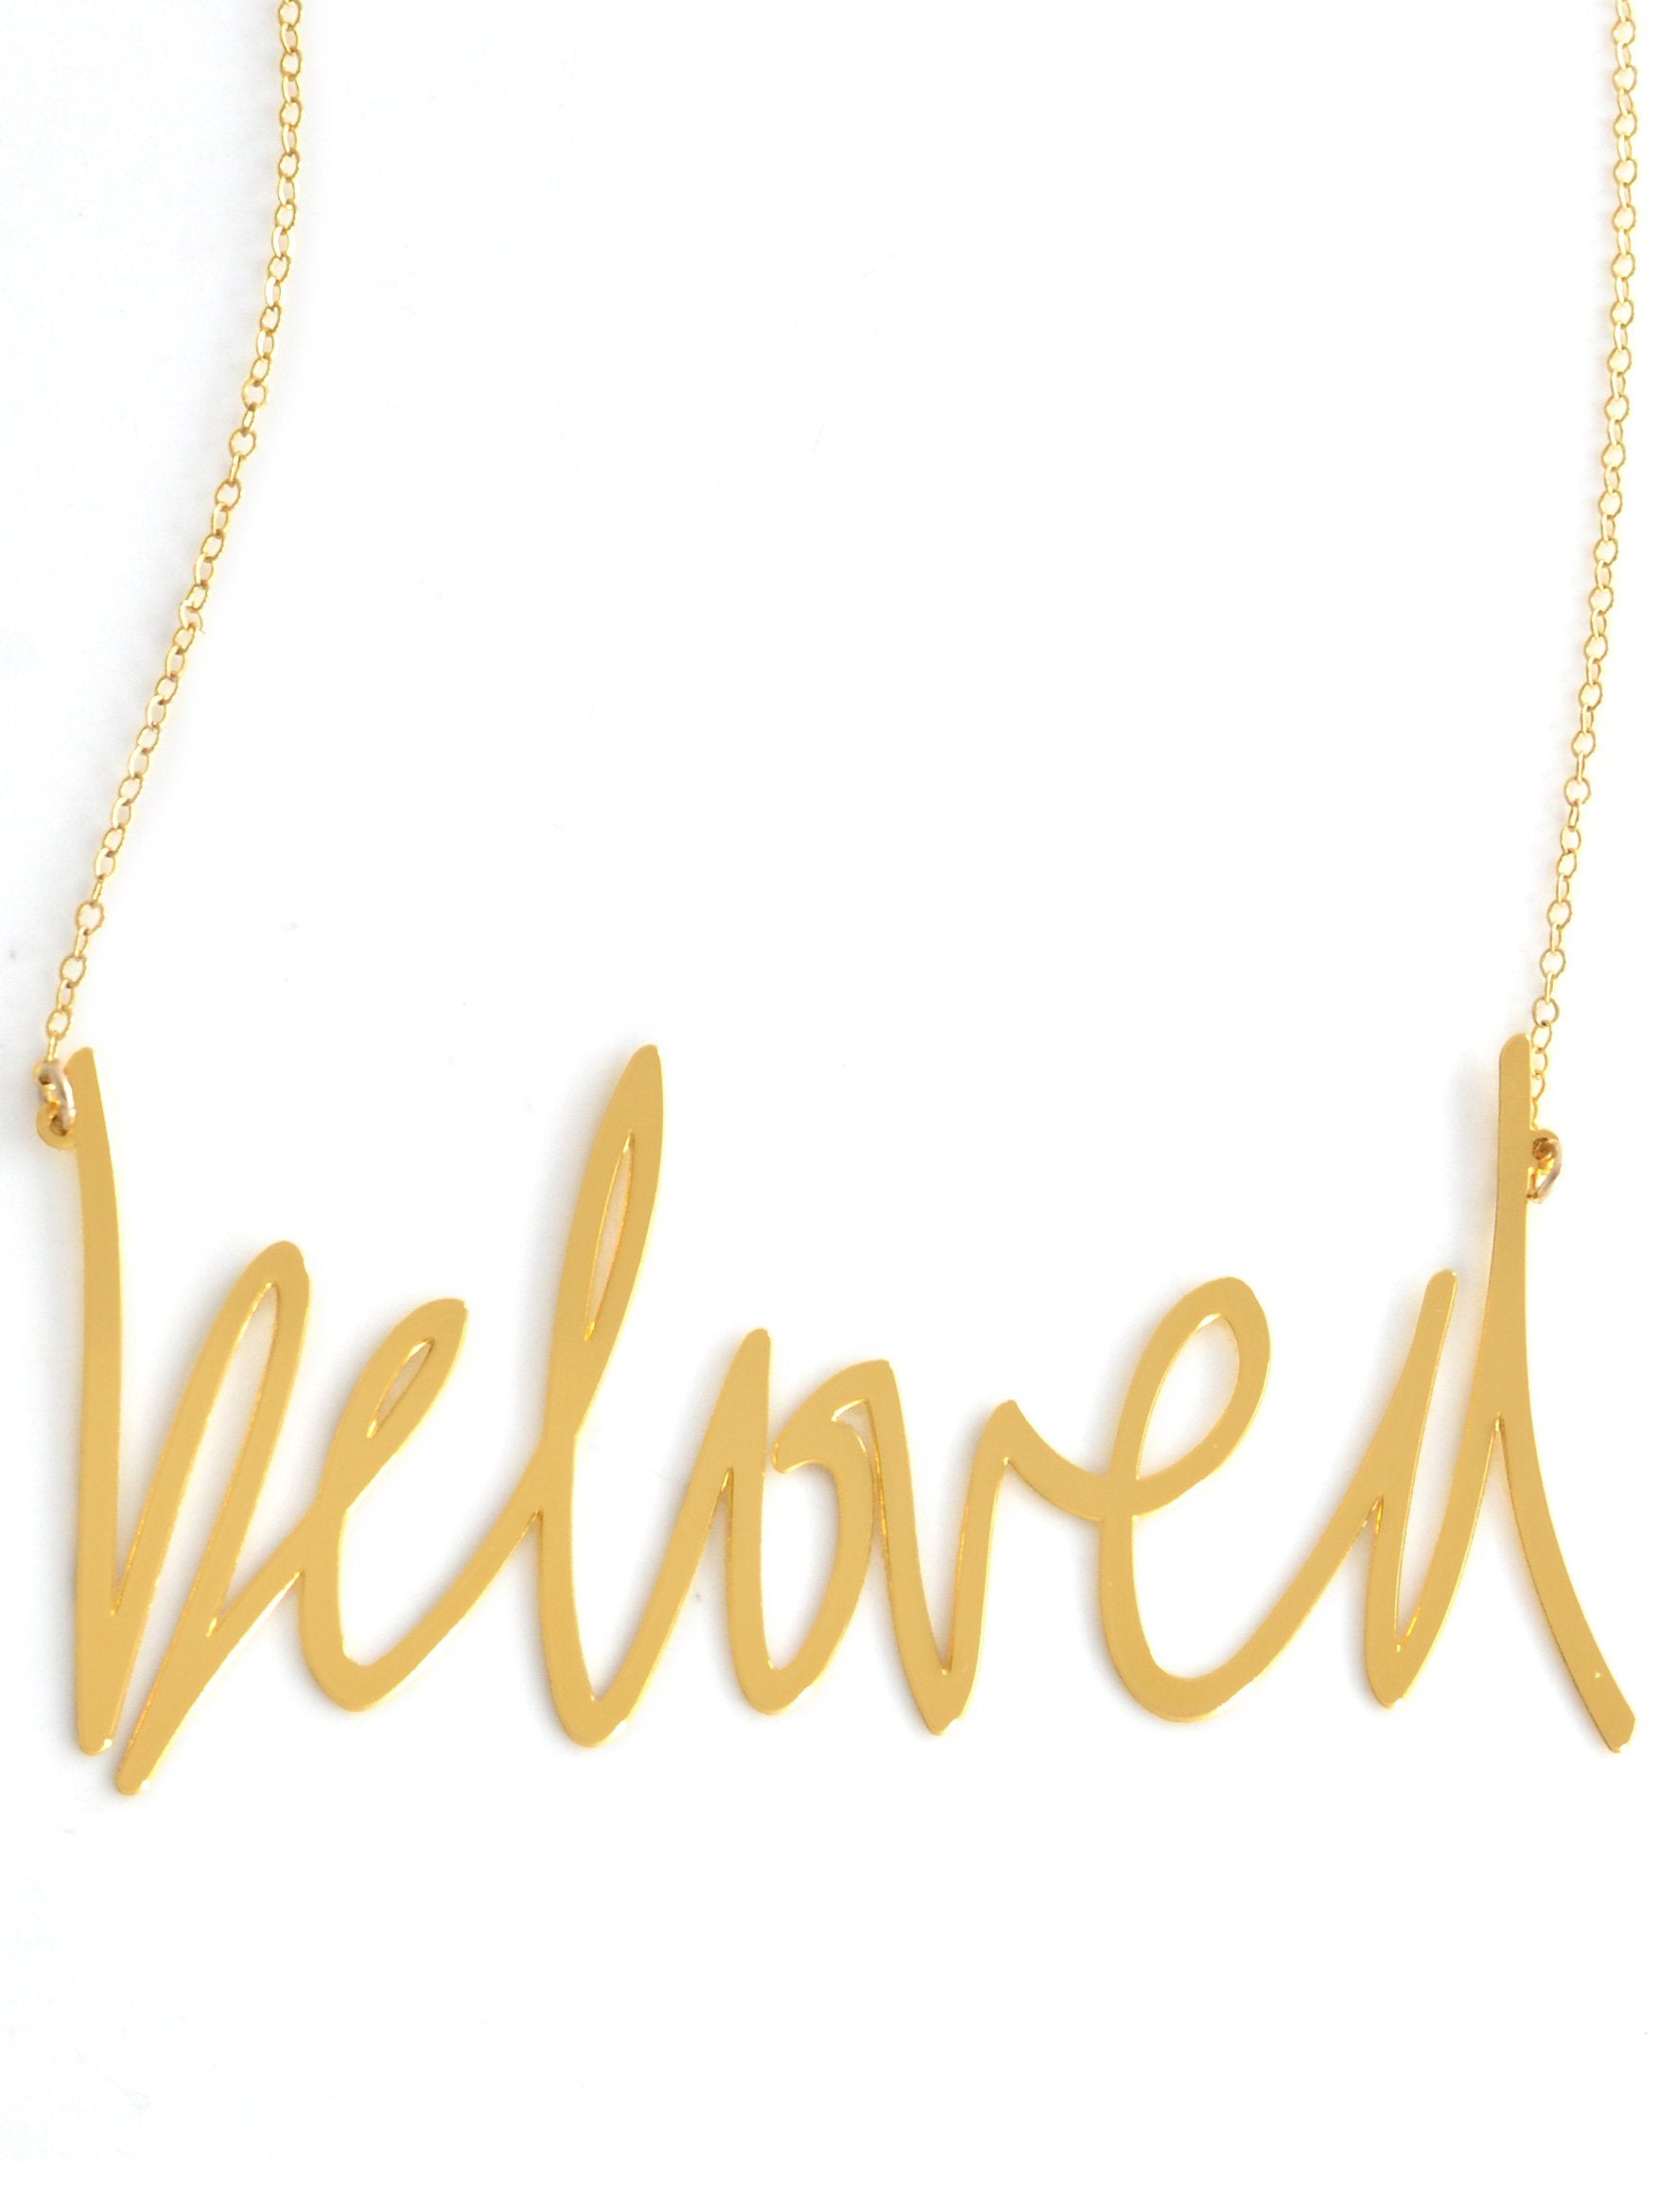 BelovedNecklace - High Quality, Affordable, Hand Written, Self Love, Mantra Word Necklace - Available in Gold and Silver - Small and Large Sizes - Made in USA - Brevity Jewelry